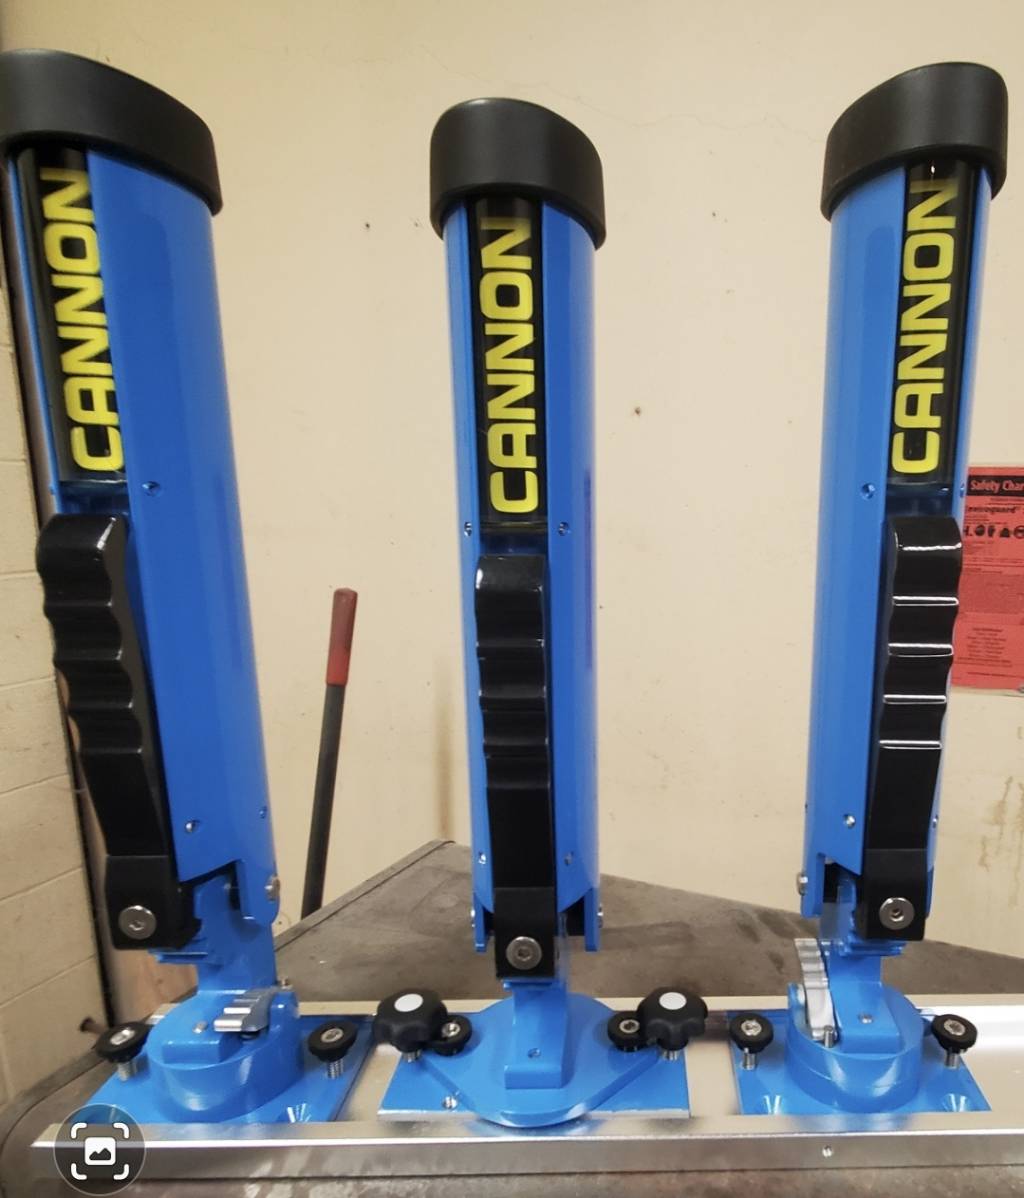 Cannon Dual Axis Rod Holder - Catastrophic Failure - Tackle and Techniques  - Lake Ontario United - Lake Ontario's Largest Fishing & Hunting Community  - New York and Ontario Canada